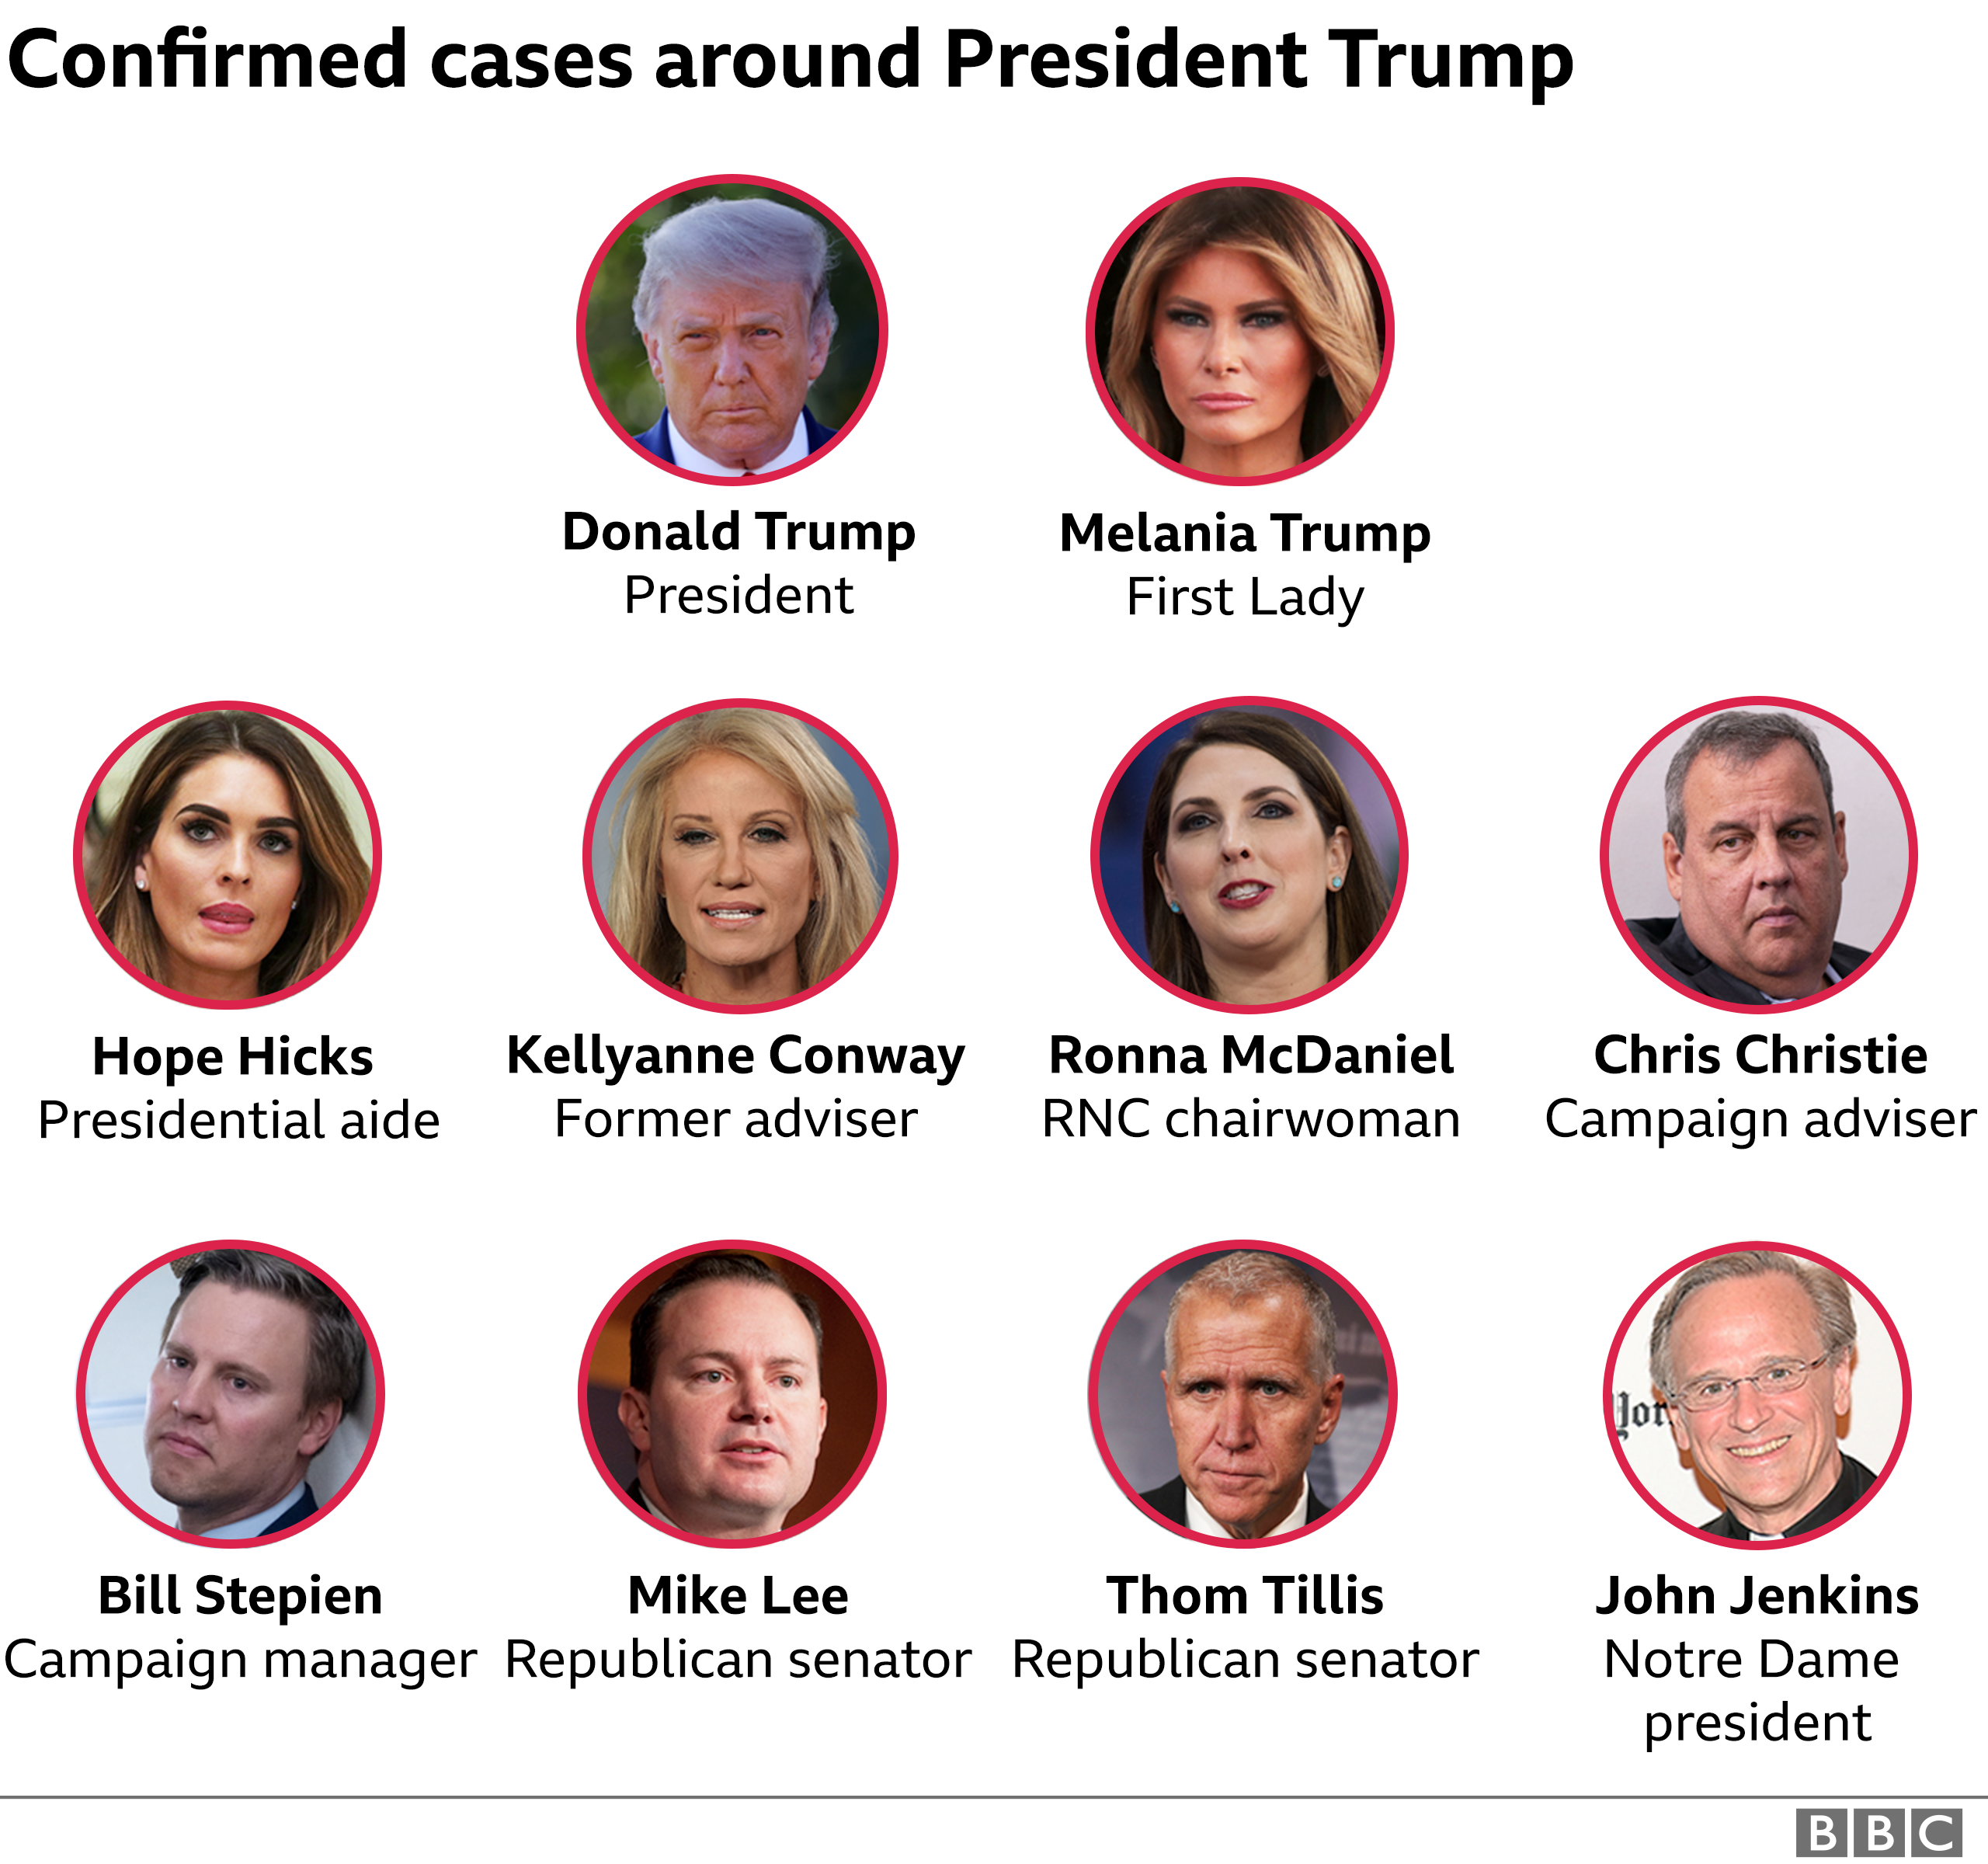 Graphic showing confirmed cases around the president